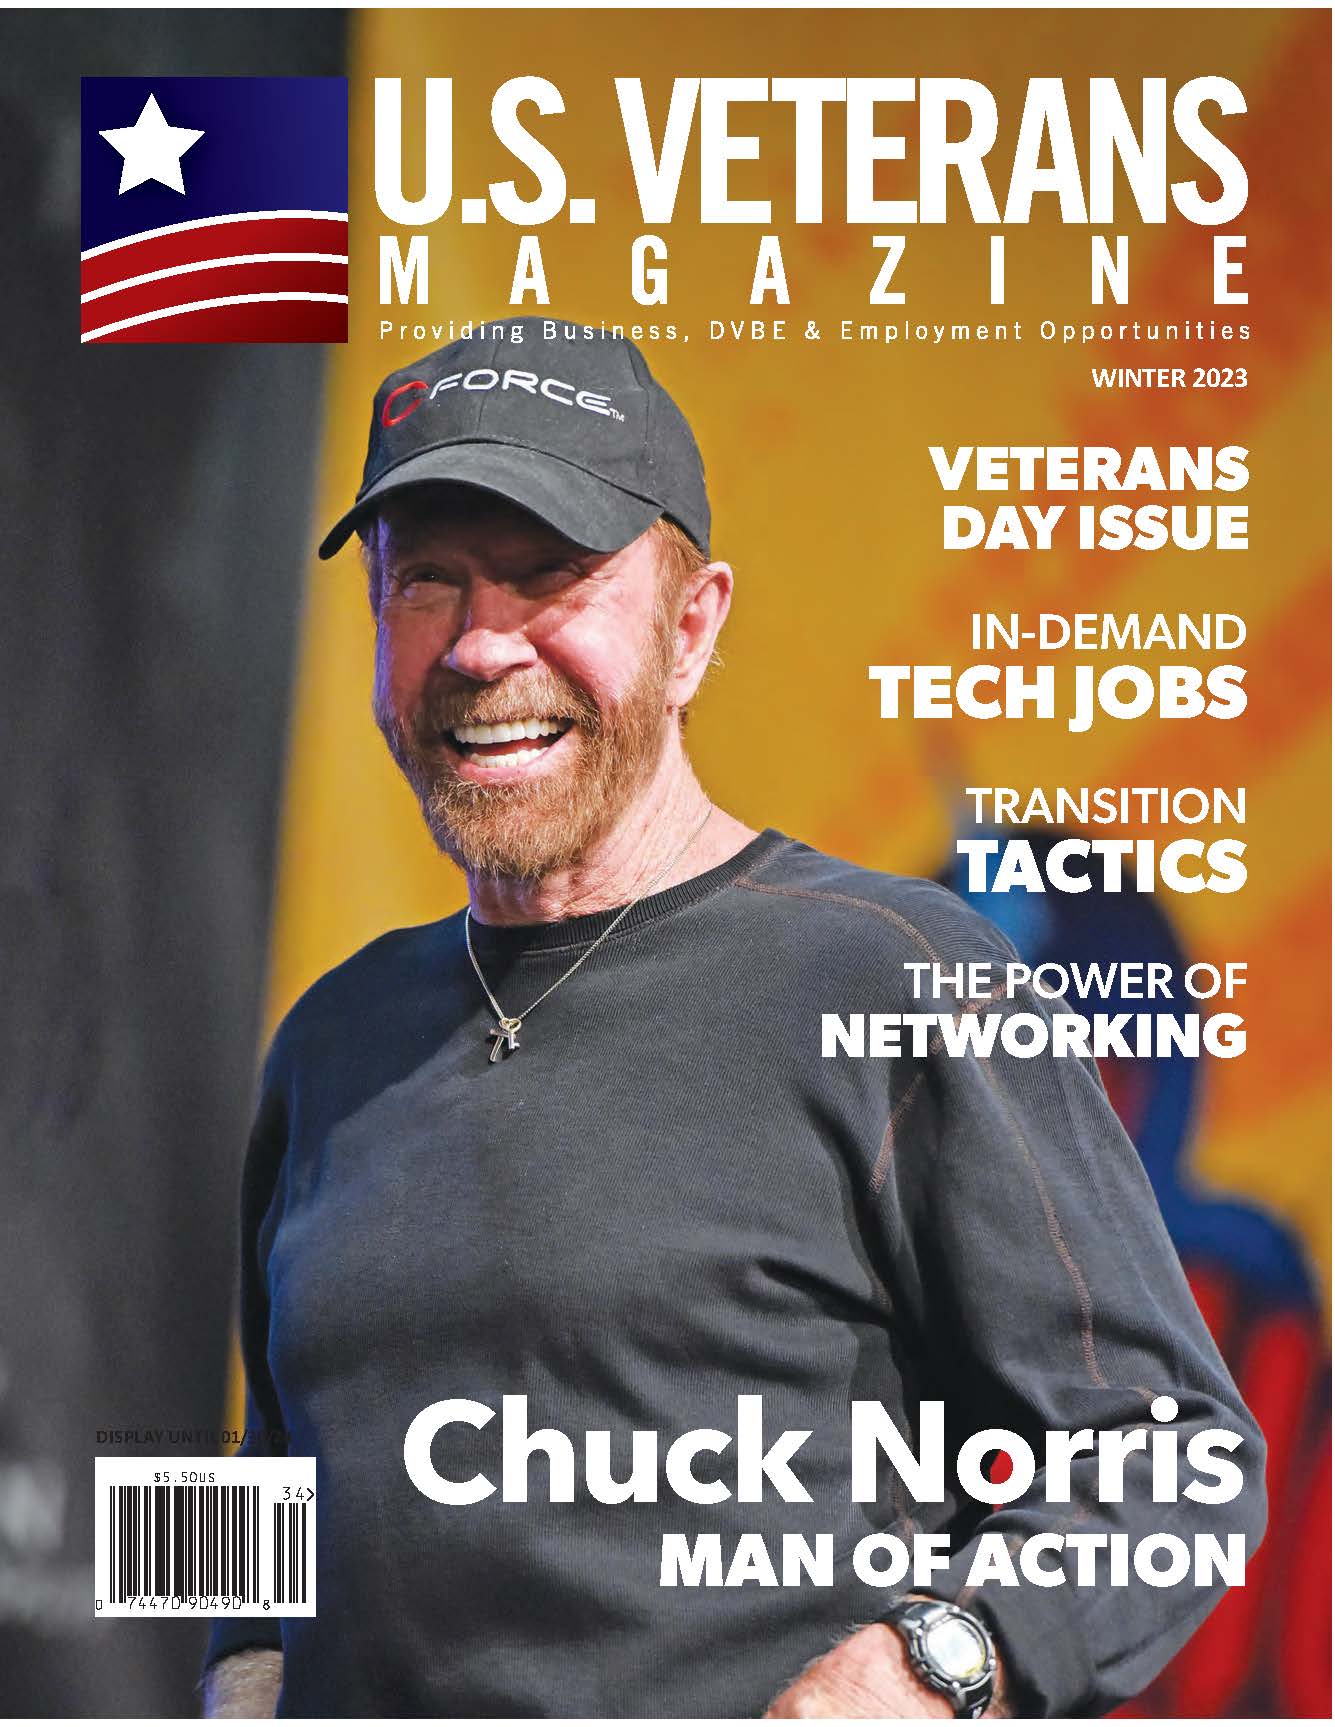 U.S. Veterans Magazine featuring cover story Chuck Norris!